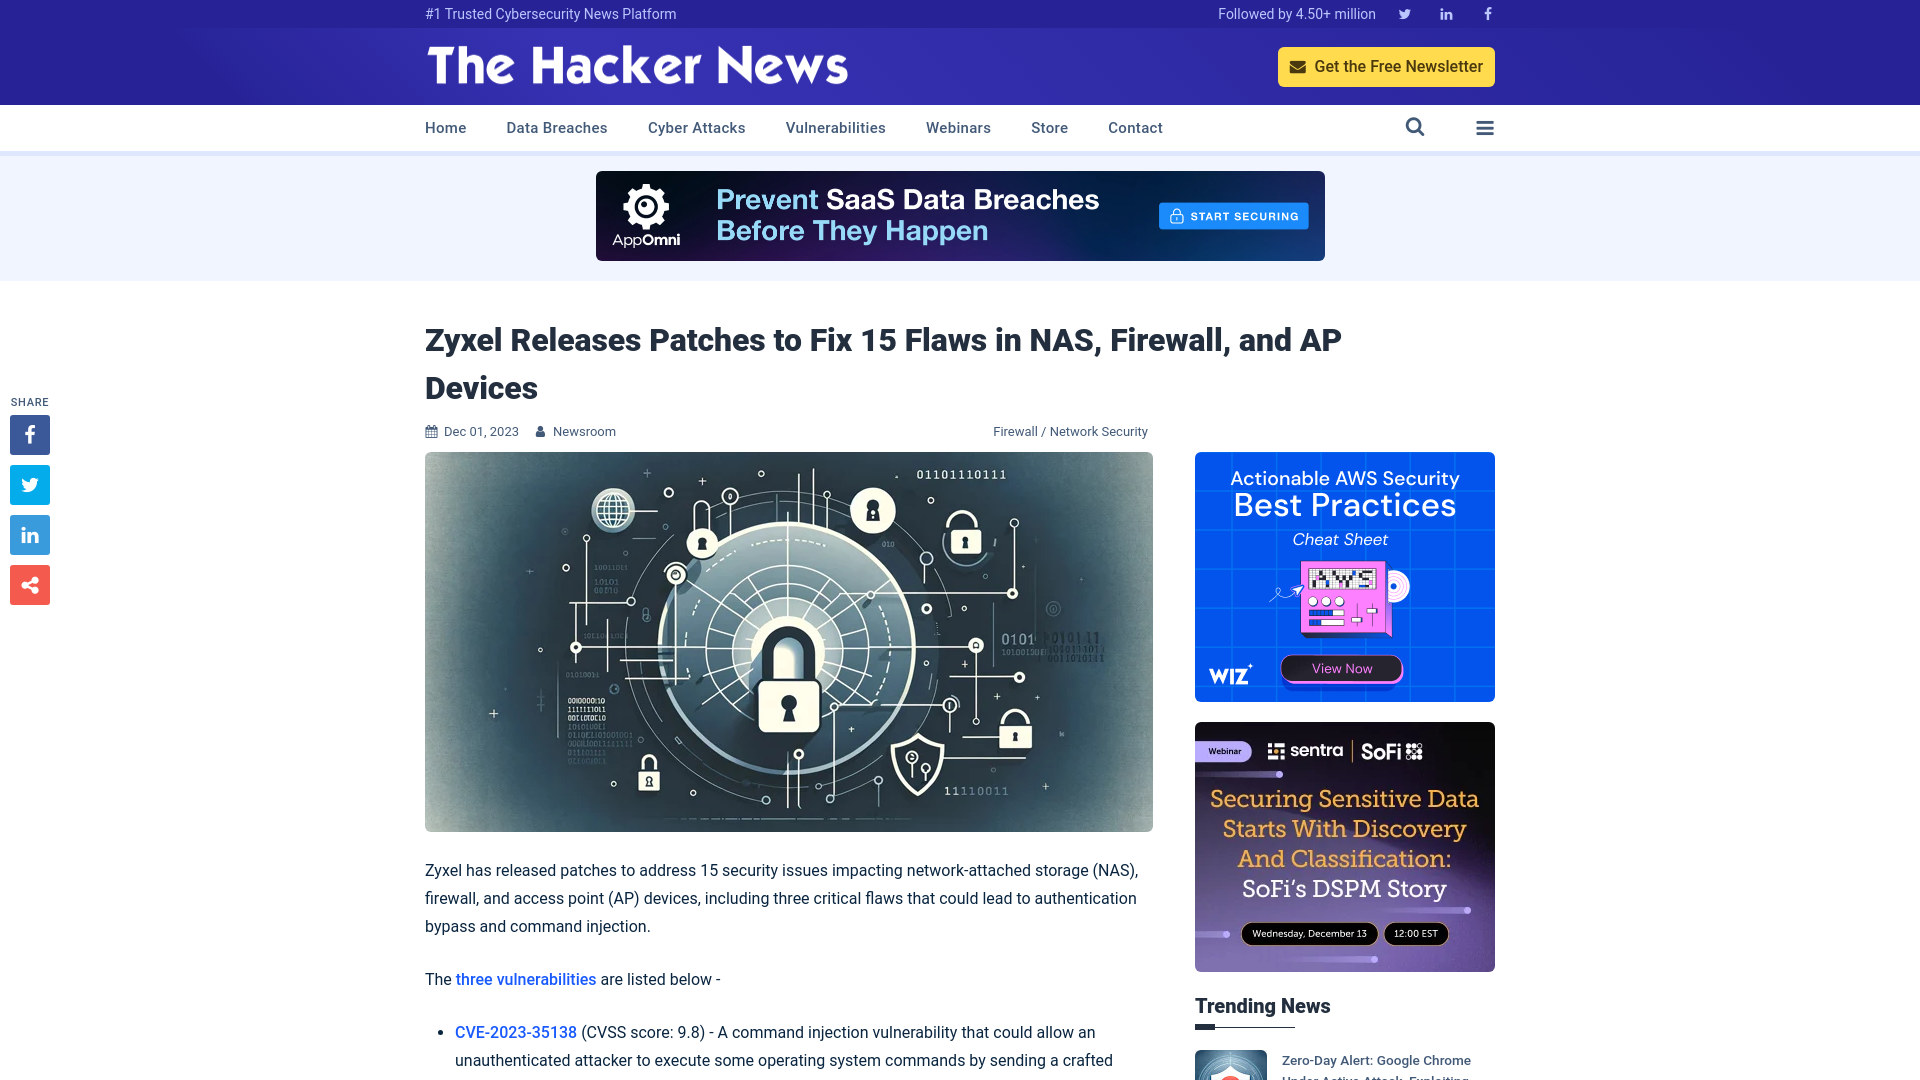 Zyxel Releases Patches to Fix 15 Flaws in NAS, Firewall, and AP Devices